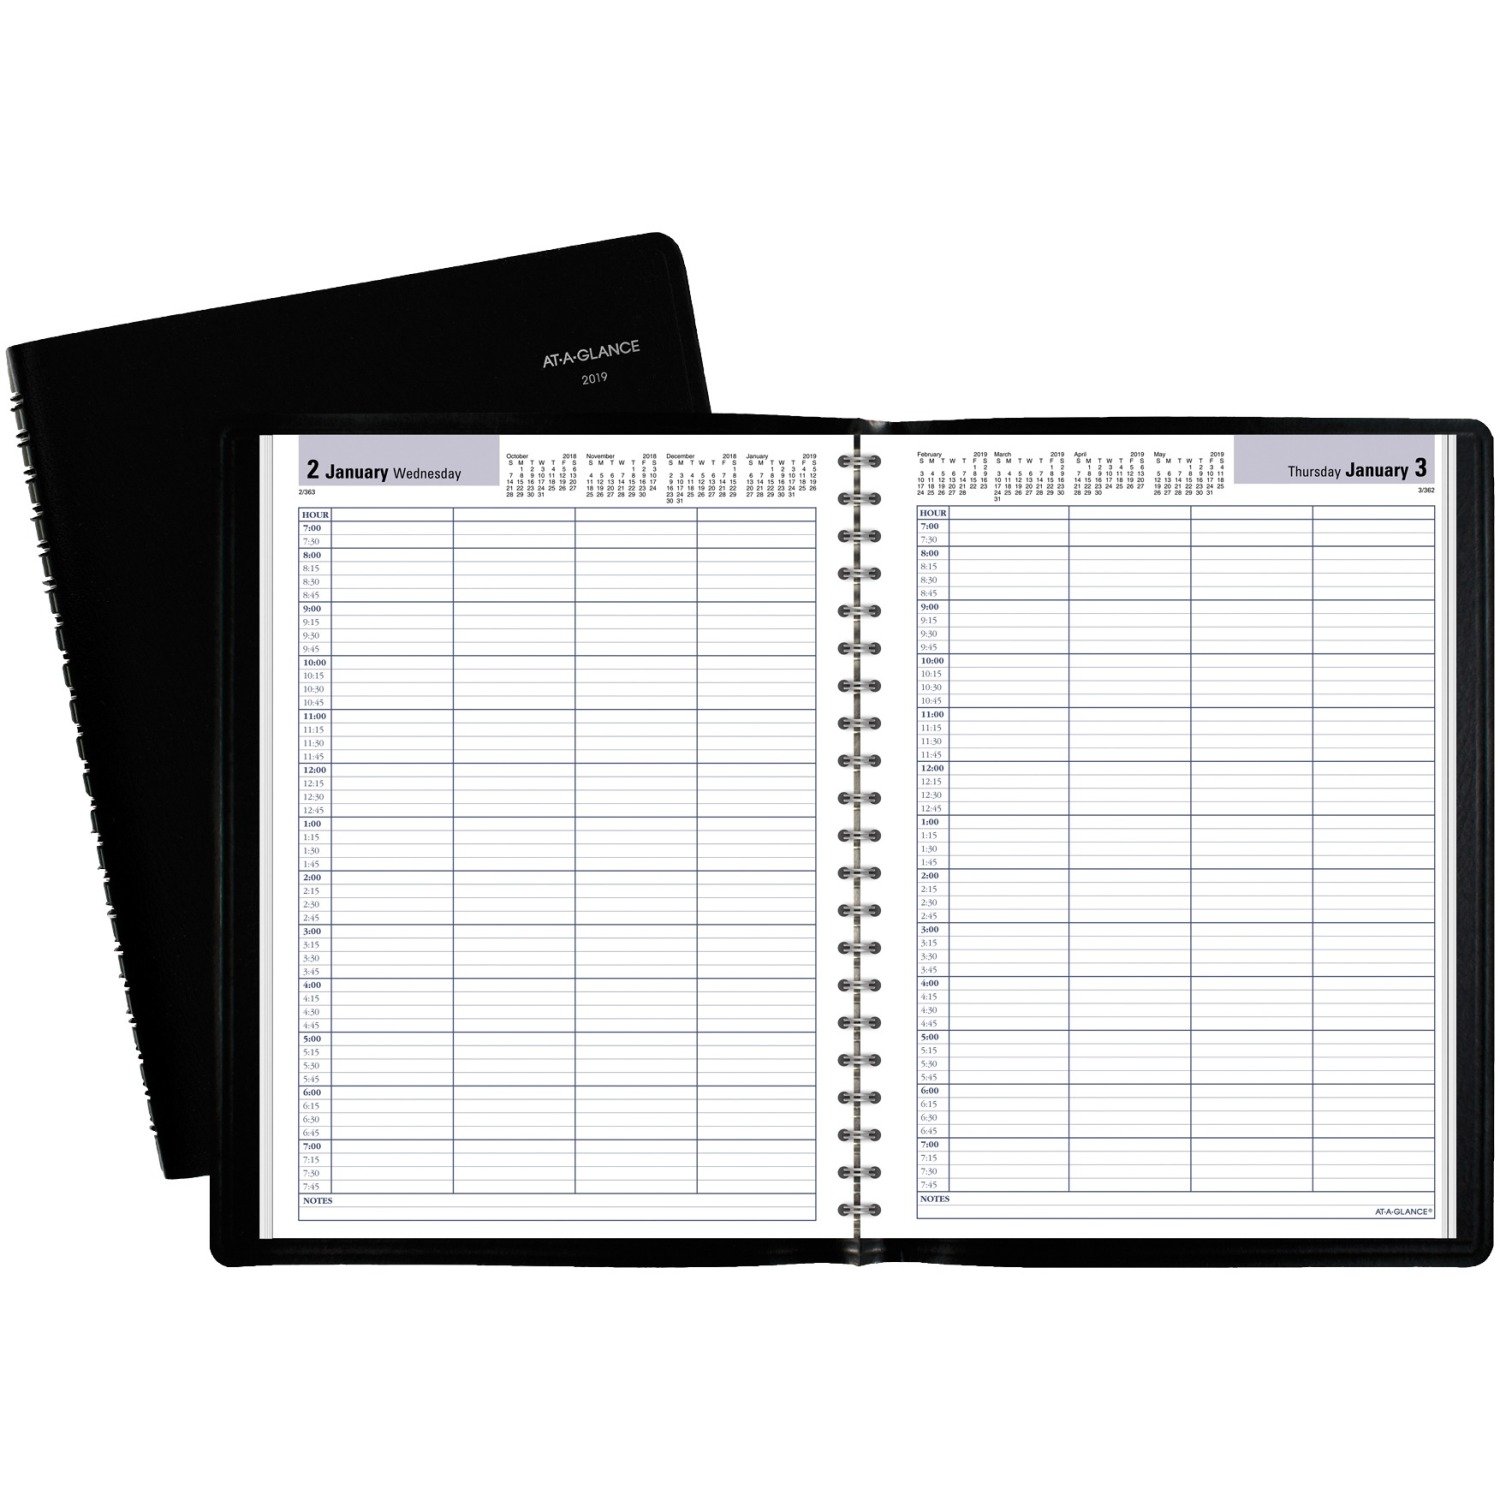 At-A-Glance DayMinder 4-Person Daily Appointment Book